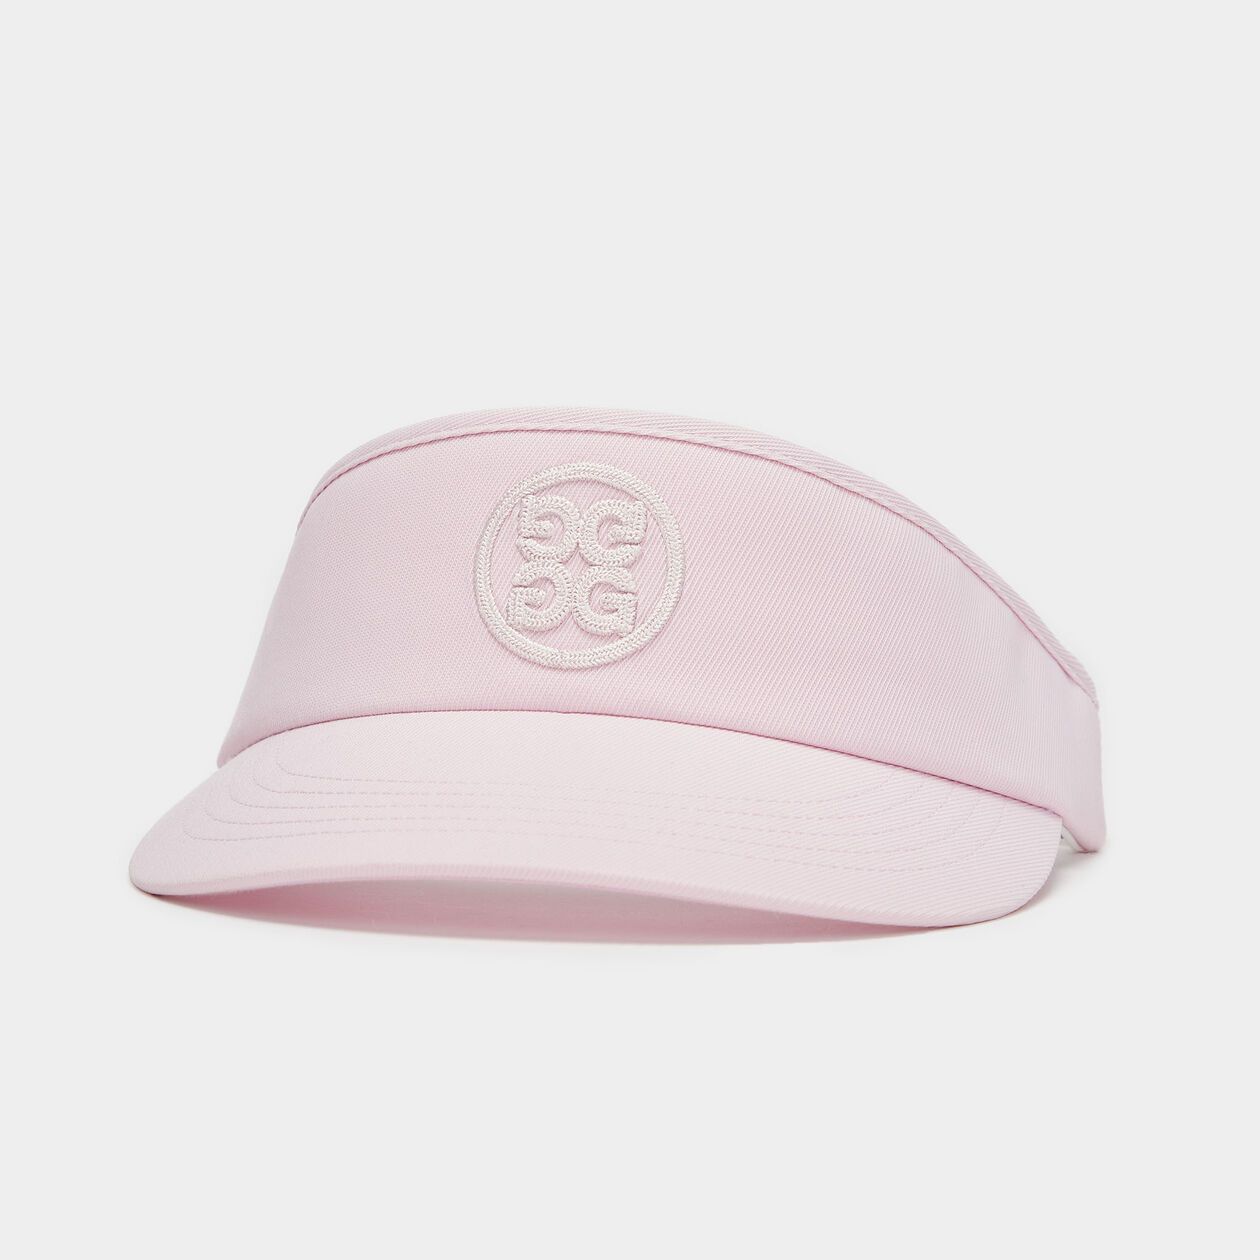 CIRCLE G'S STRETCH TWILL VISOR | MEN'S HATS | G/FORE | G/FORE | GFORE.com